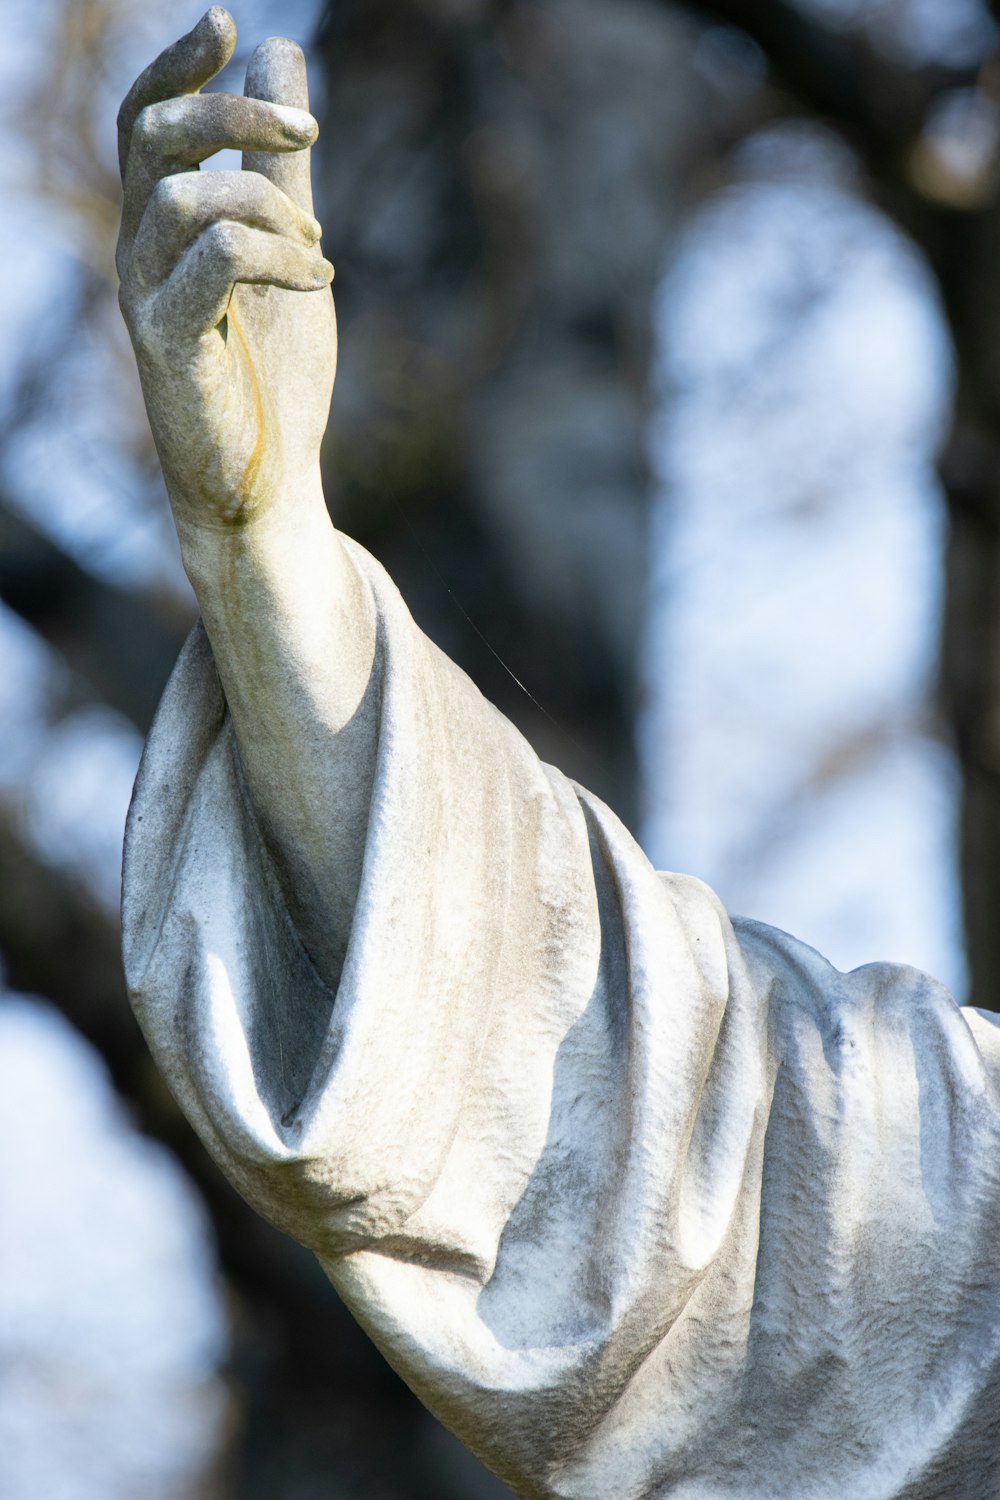 a close up of a statue of a person holding a cell phone